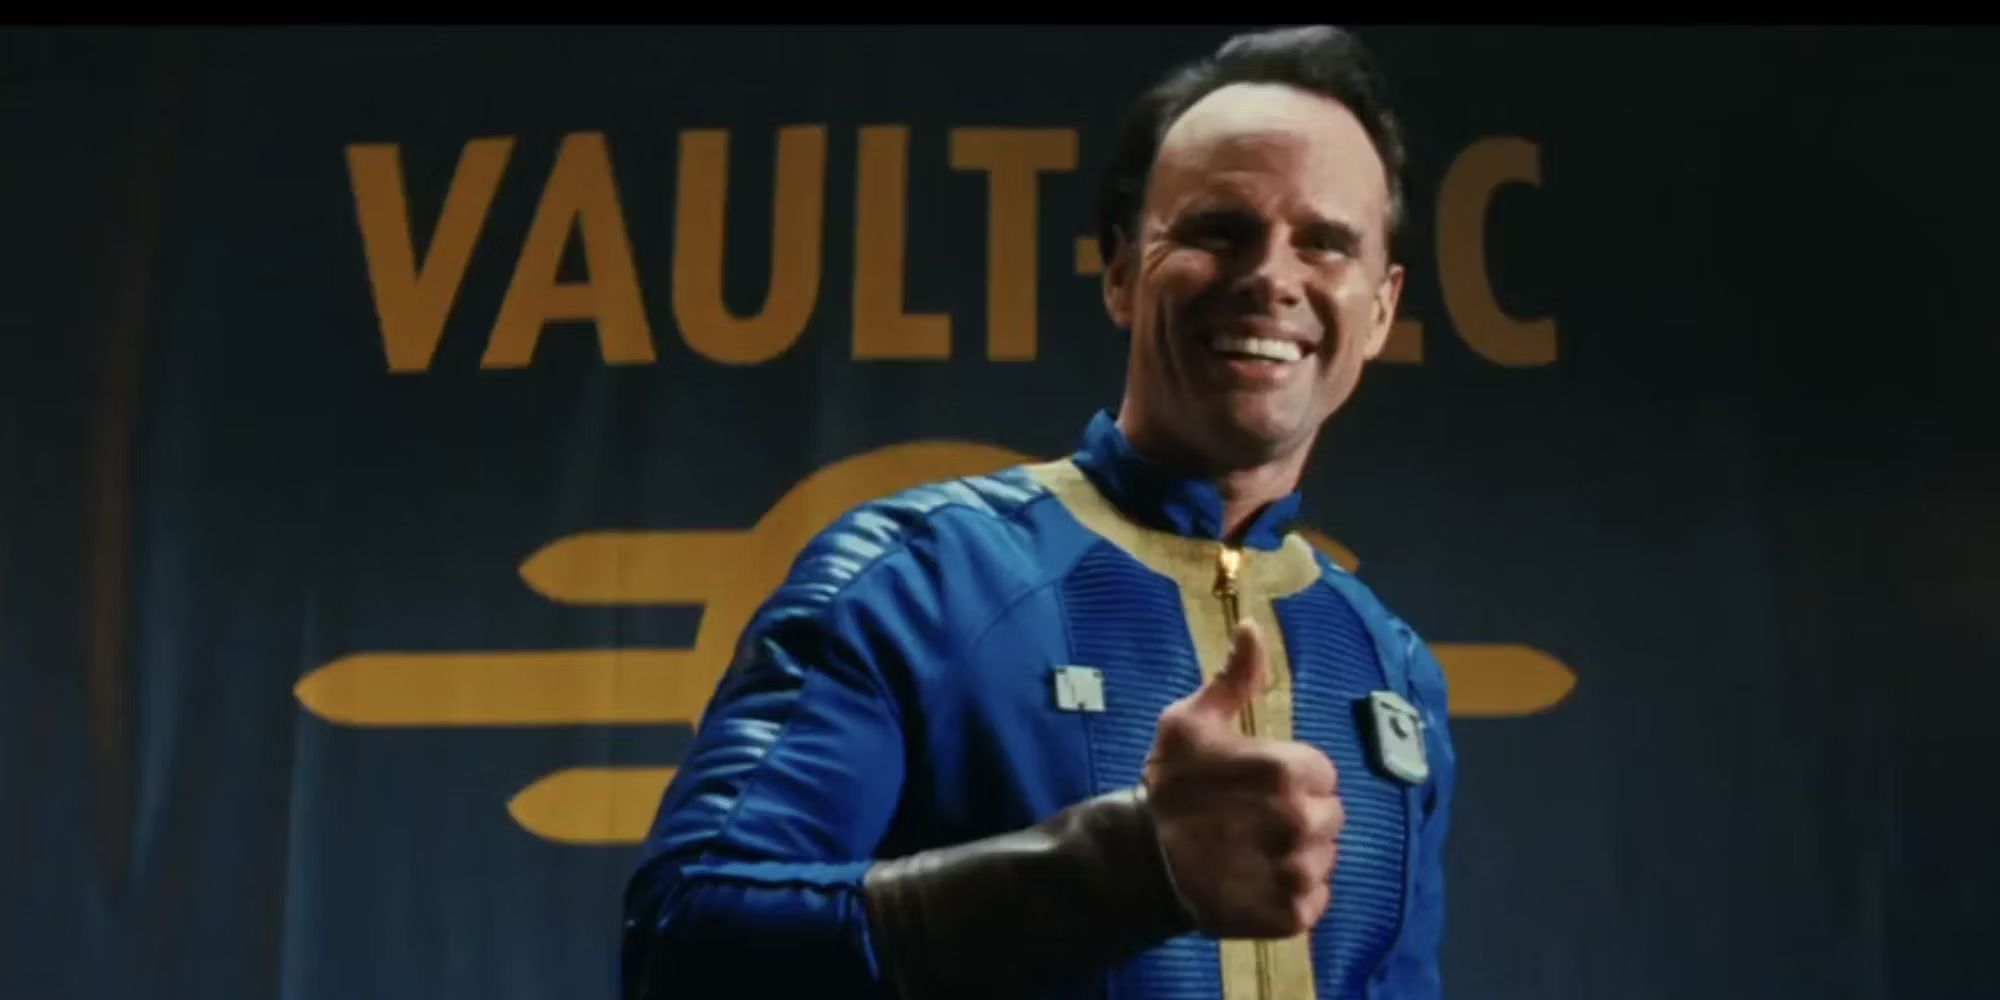 Fallout - Cooper Howard as Vault Boy giving a thumbs up